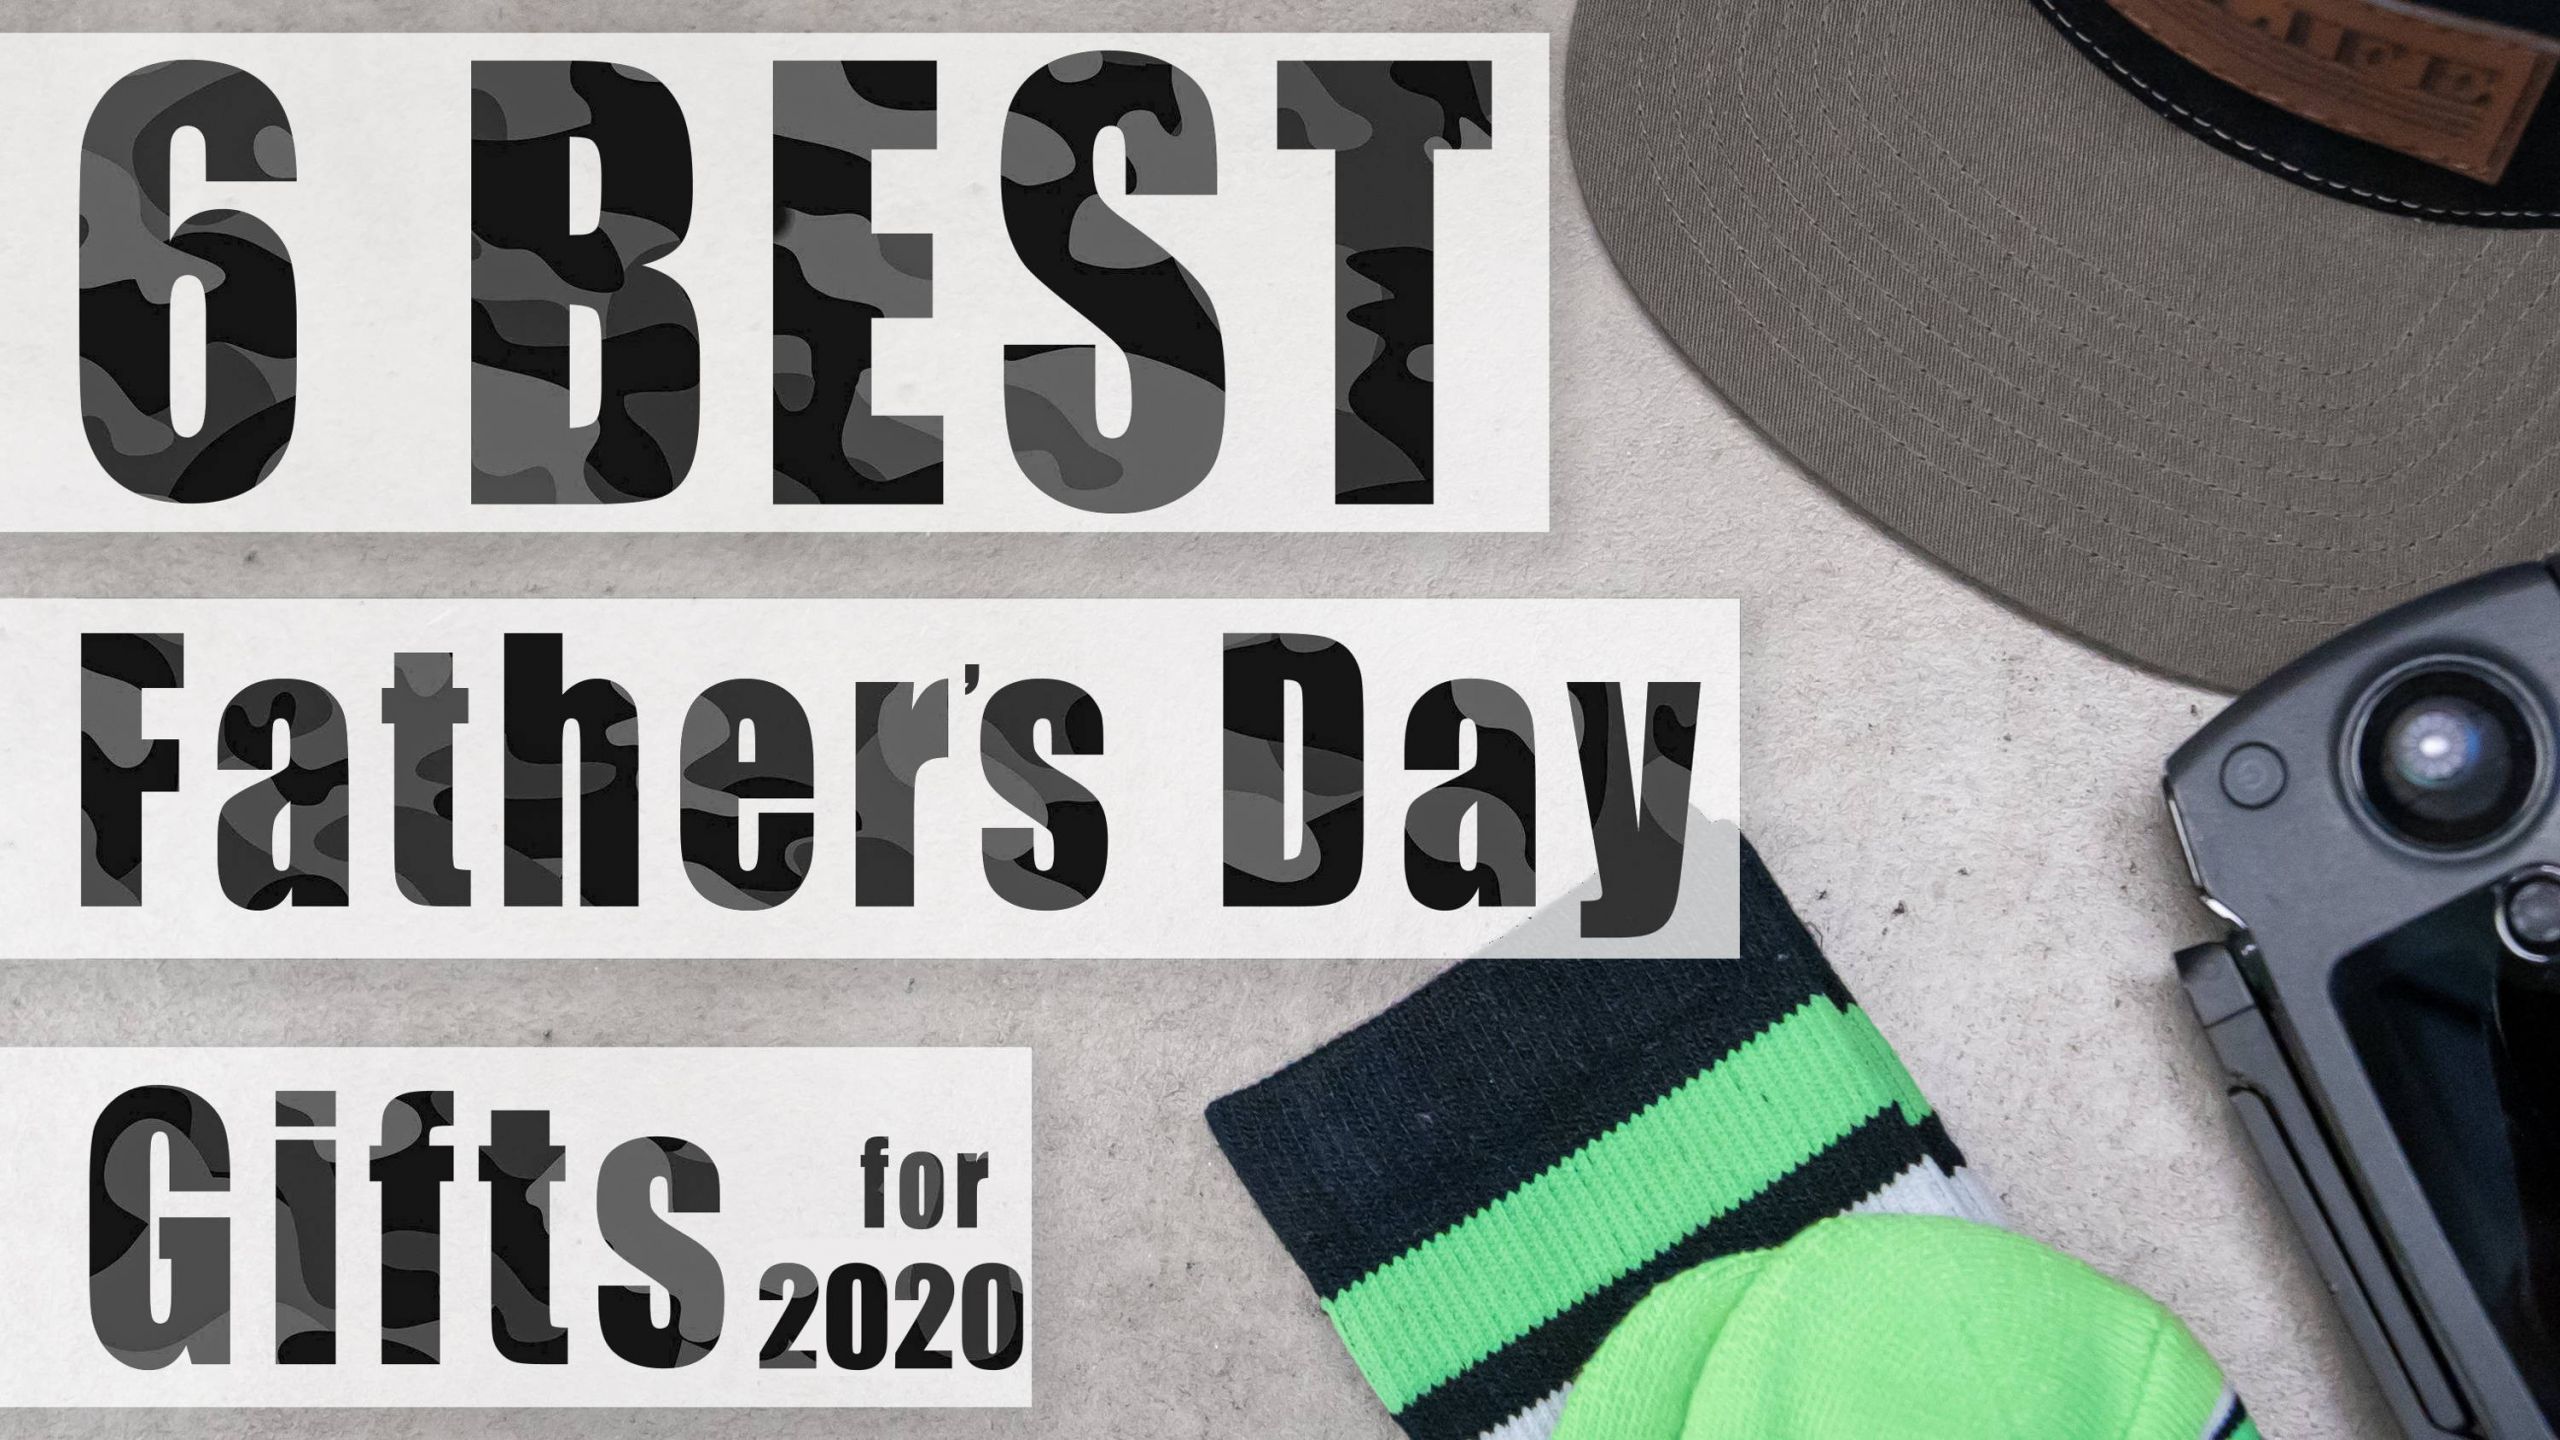 Cool Fathers Day Gifts 2020
 Top 6 Best Father’s Day Gifts for 2020